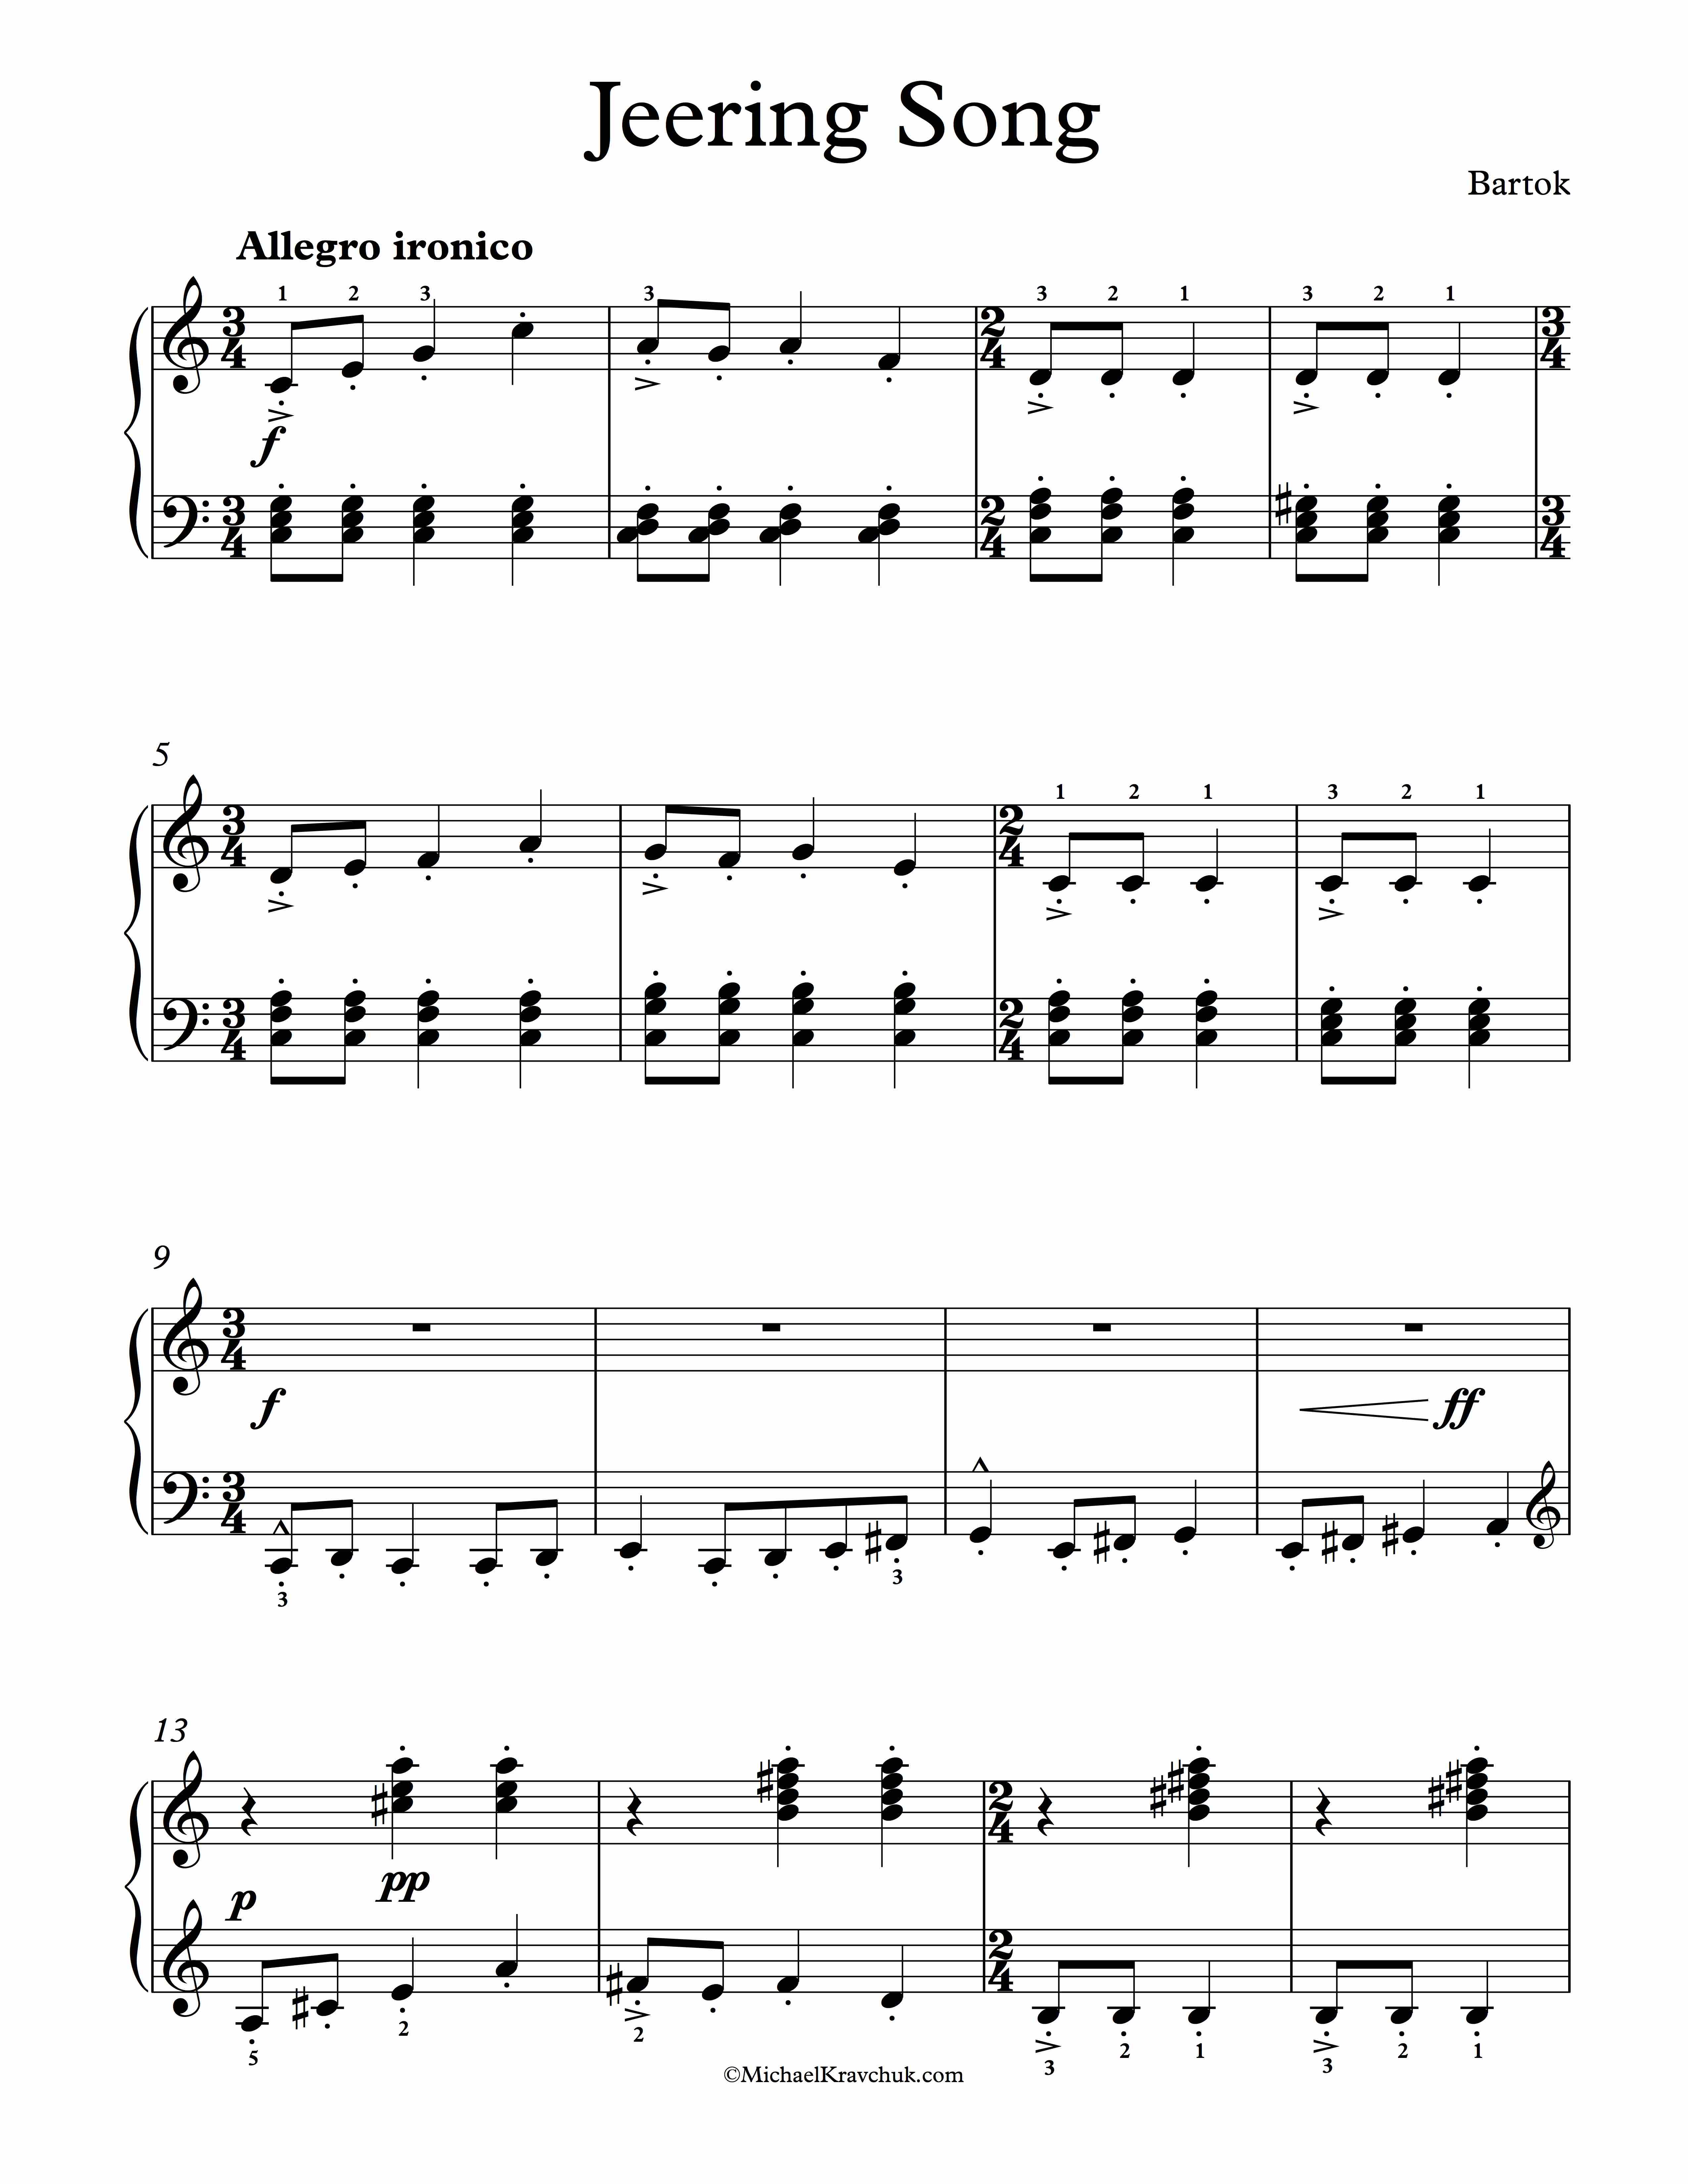 Free Piano Sheet Music - Jeering Song From For Children - Bartok